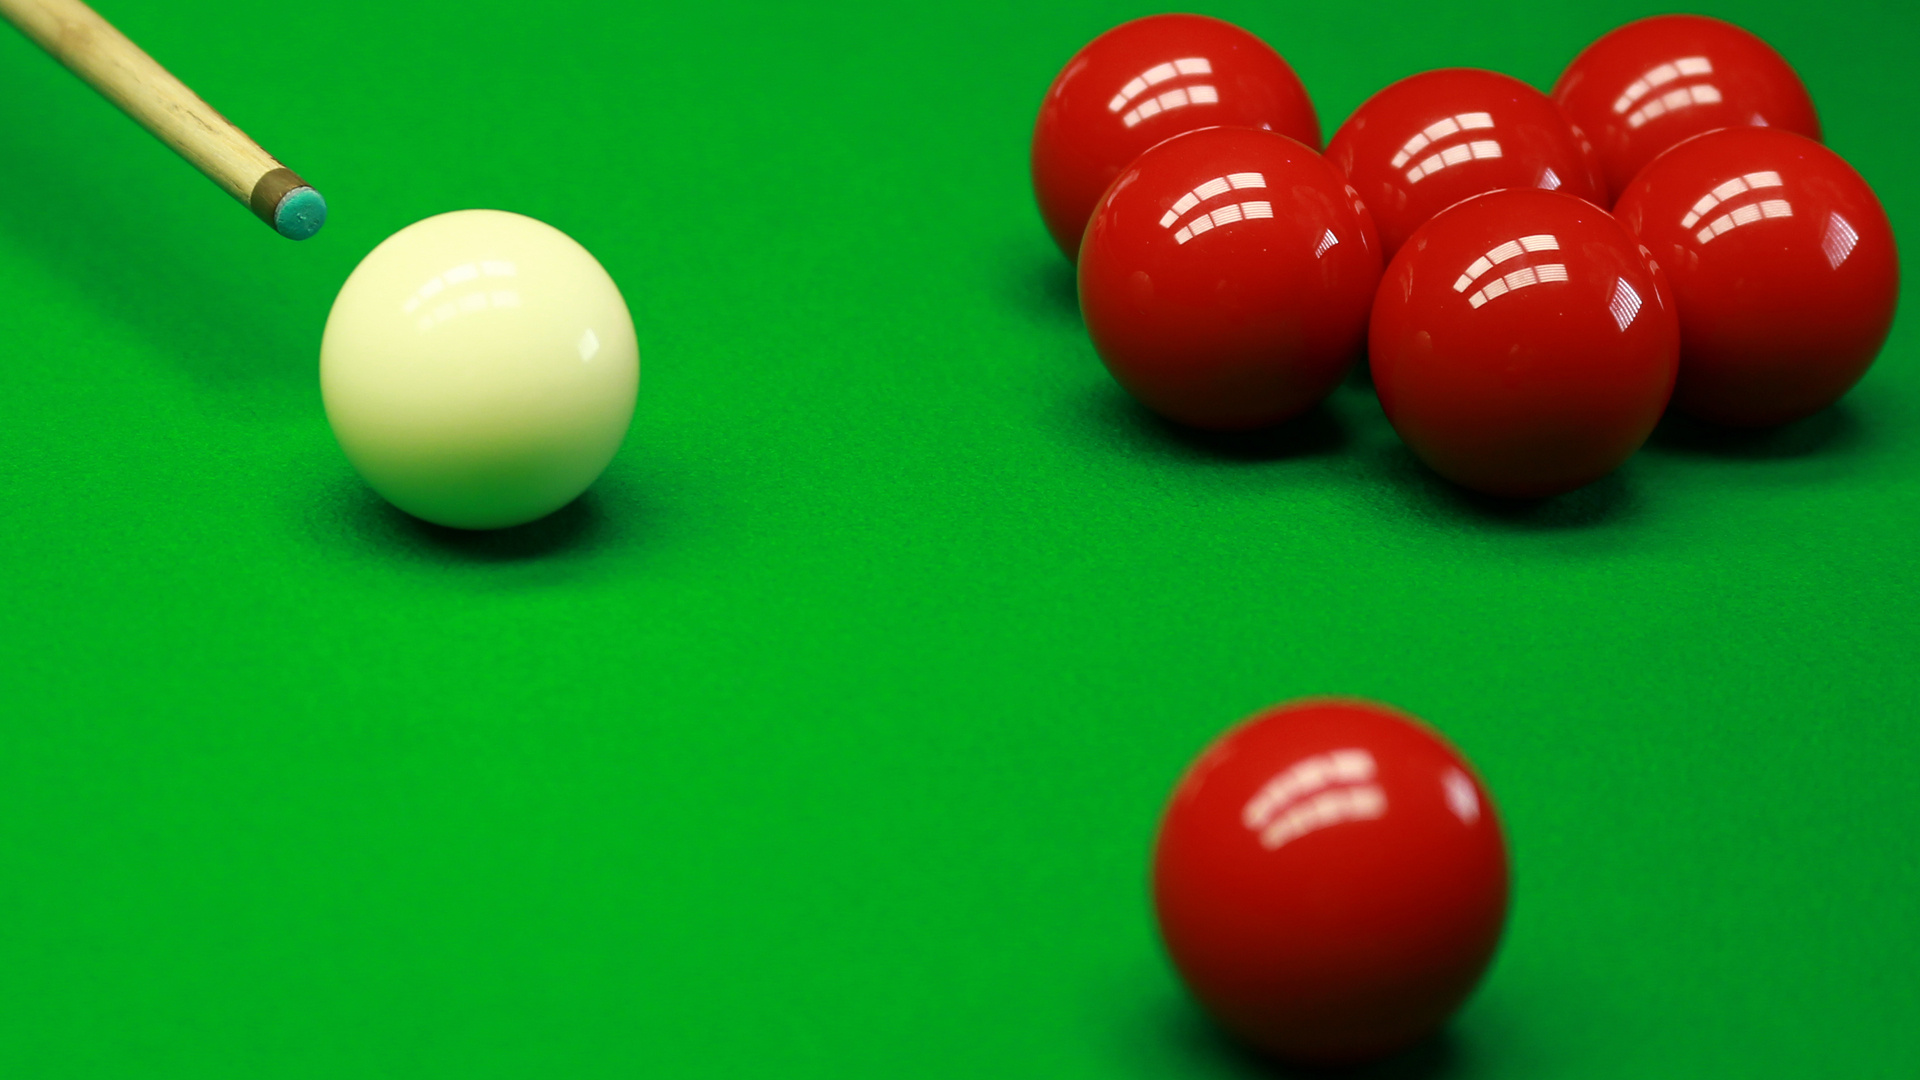 Simon Dunn's snooker moment, Unfortunate snooker outcome, Competitive setback, Player's experience, 1920x1080 Full HD Desktop